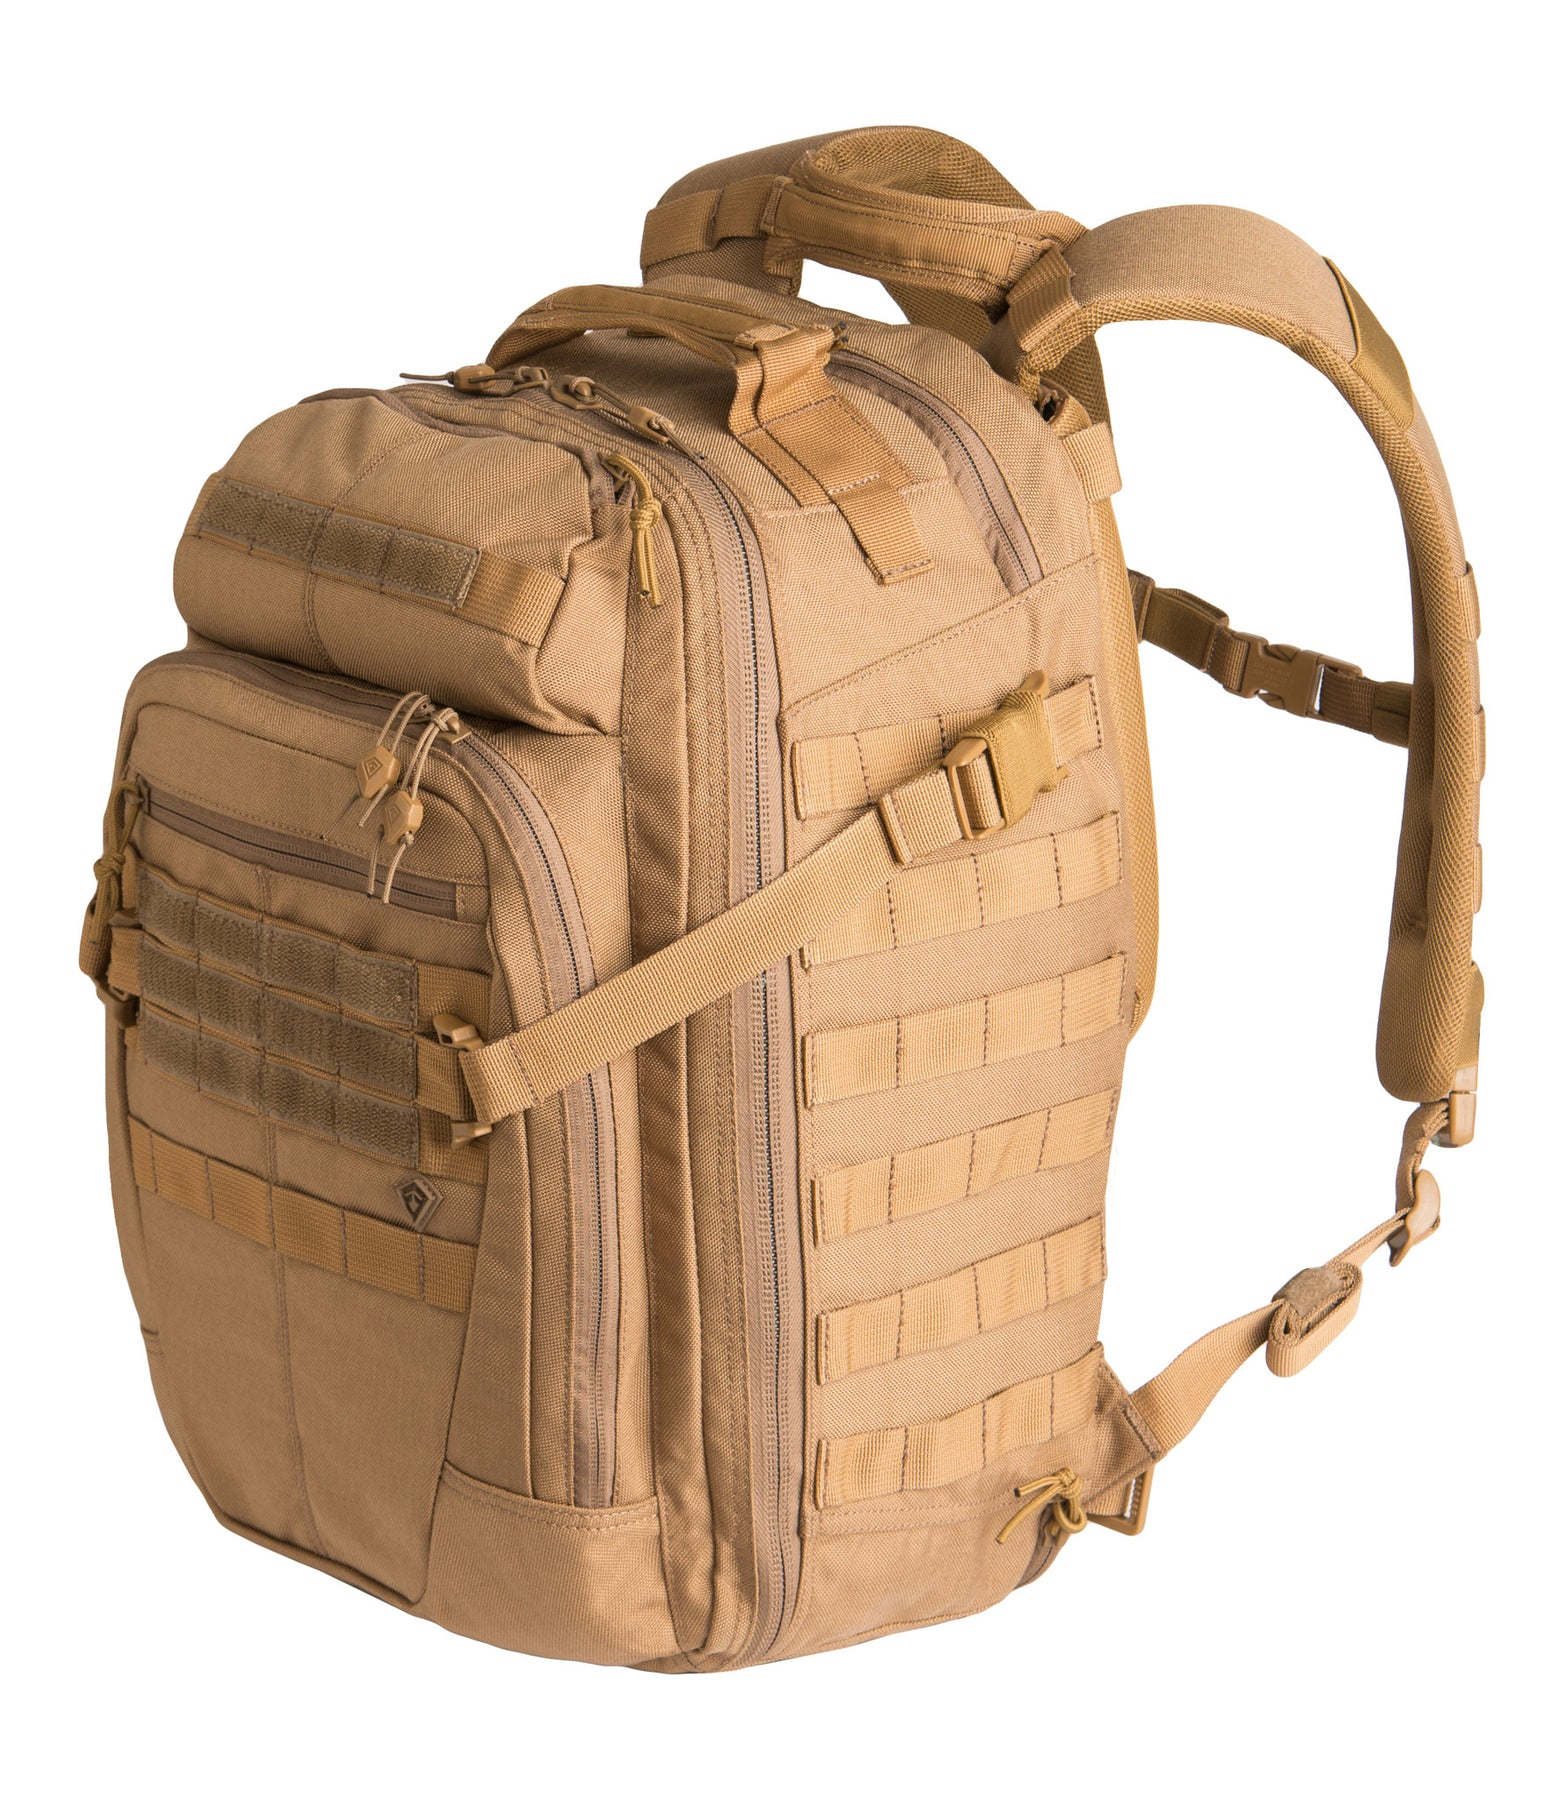 First Tactical Specialist BackPack 0.5D 25L 180006 - Coyote